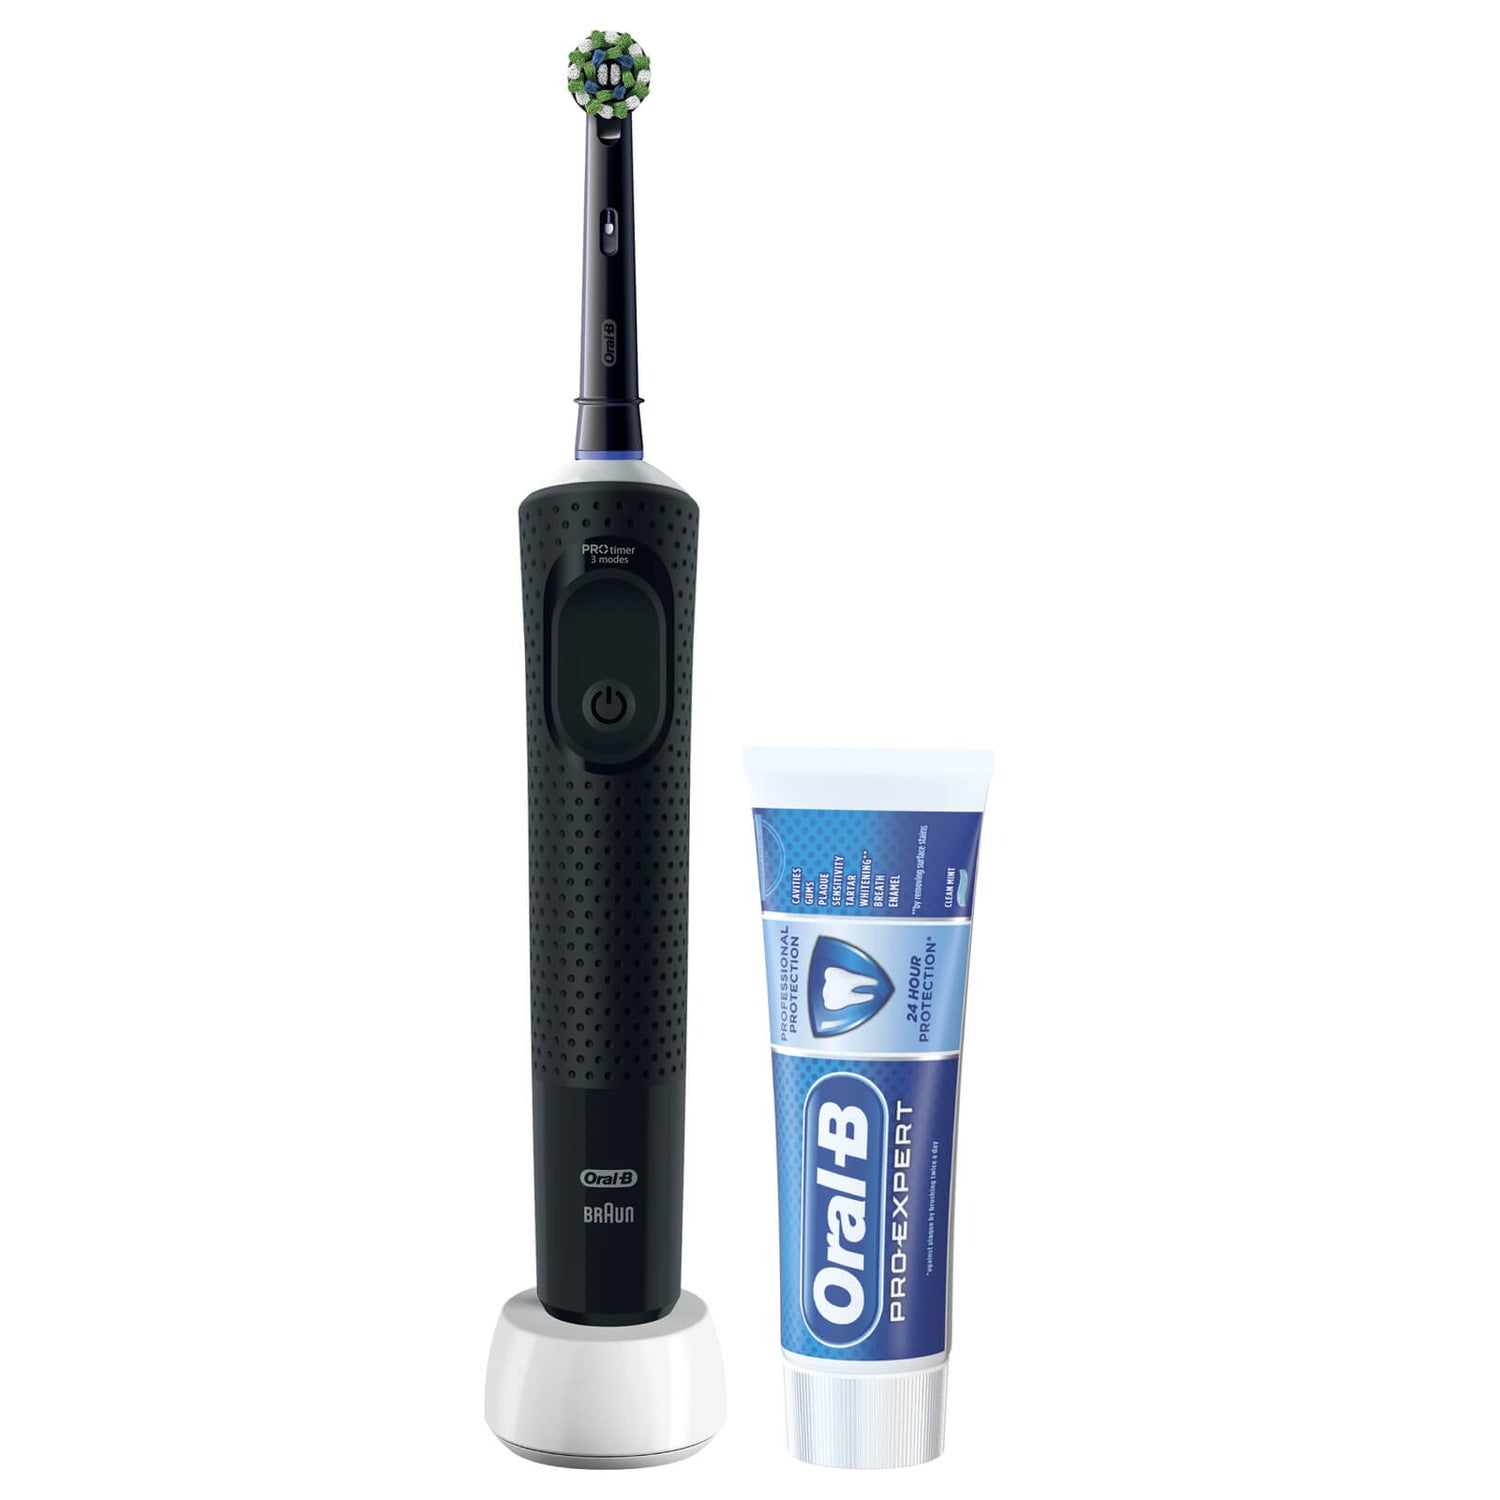 Oral-B Pro 3 3500 C/A White Electric Toothbrush + Travel Case BRAND NEW 30%  OFF